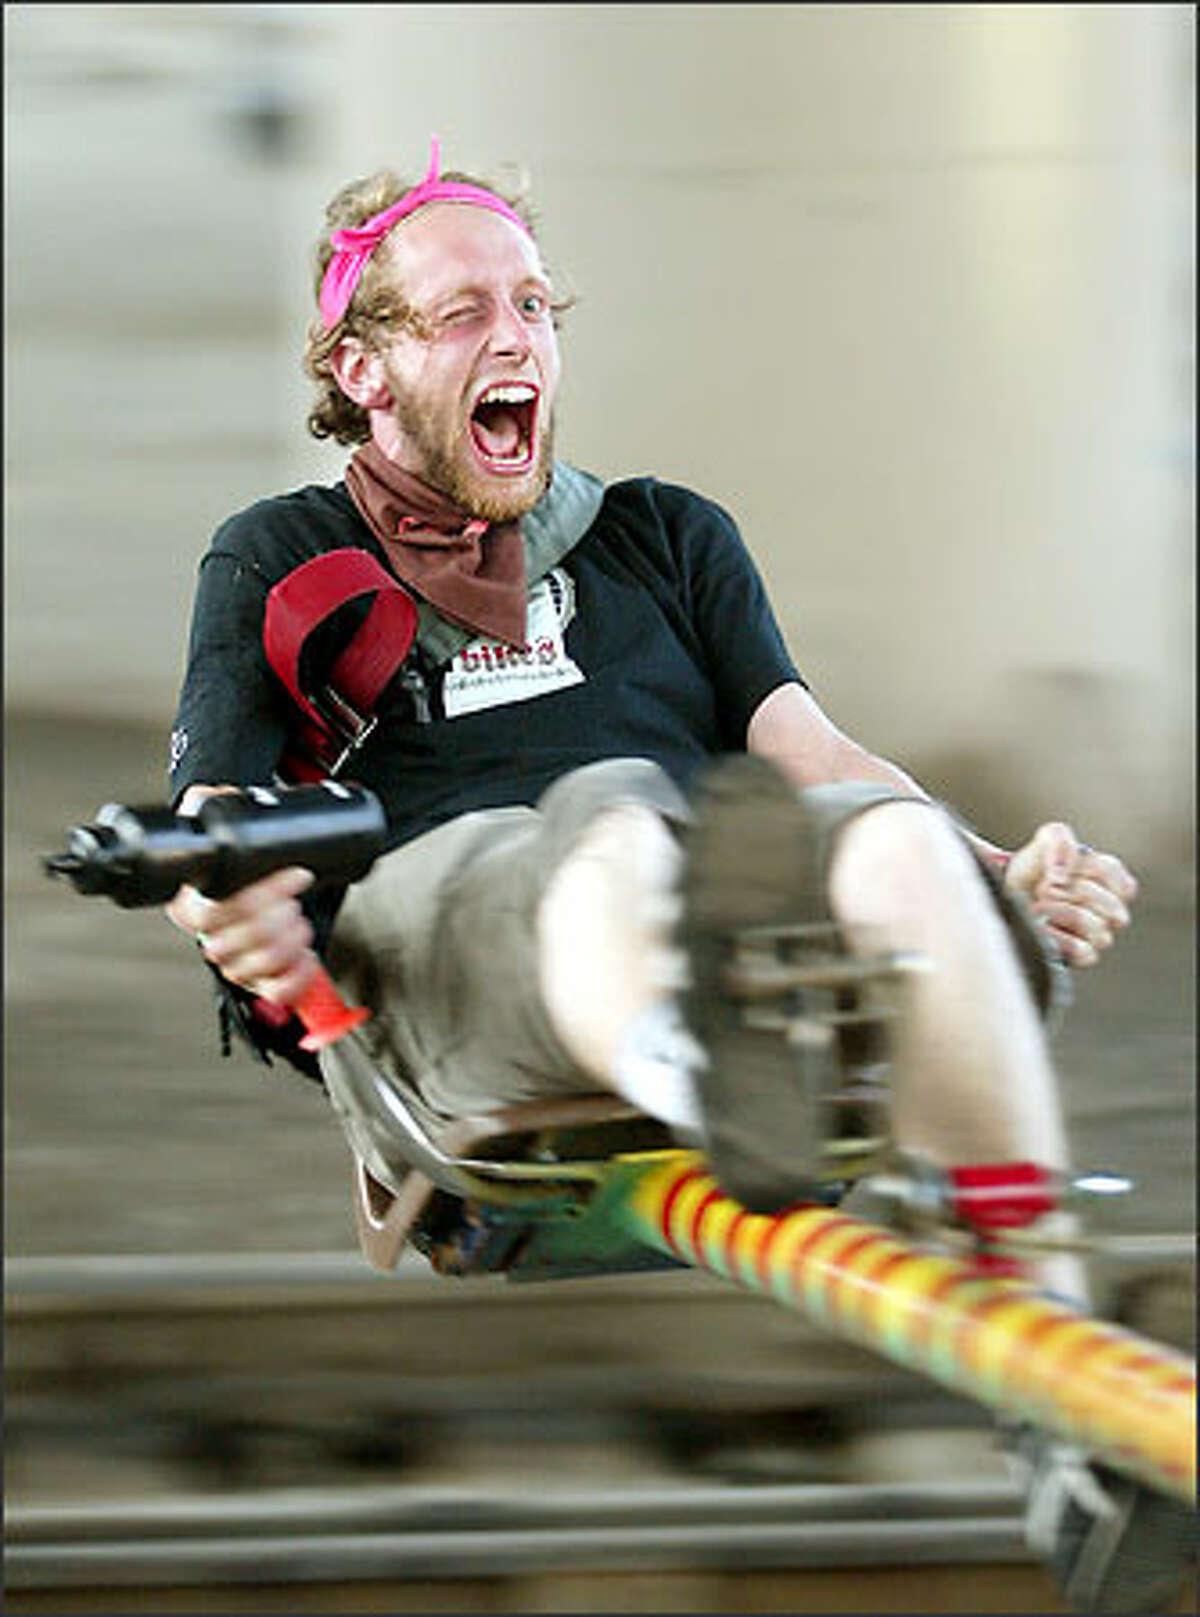 With just enough strength left to keep hold of the beer in his water bottle, Herman Beans rides a pedal-powered centrifuge during the party after the weekend's Eighth Annual Downhill and Messenger Challenge.